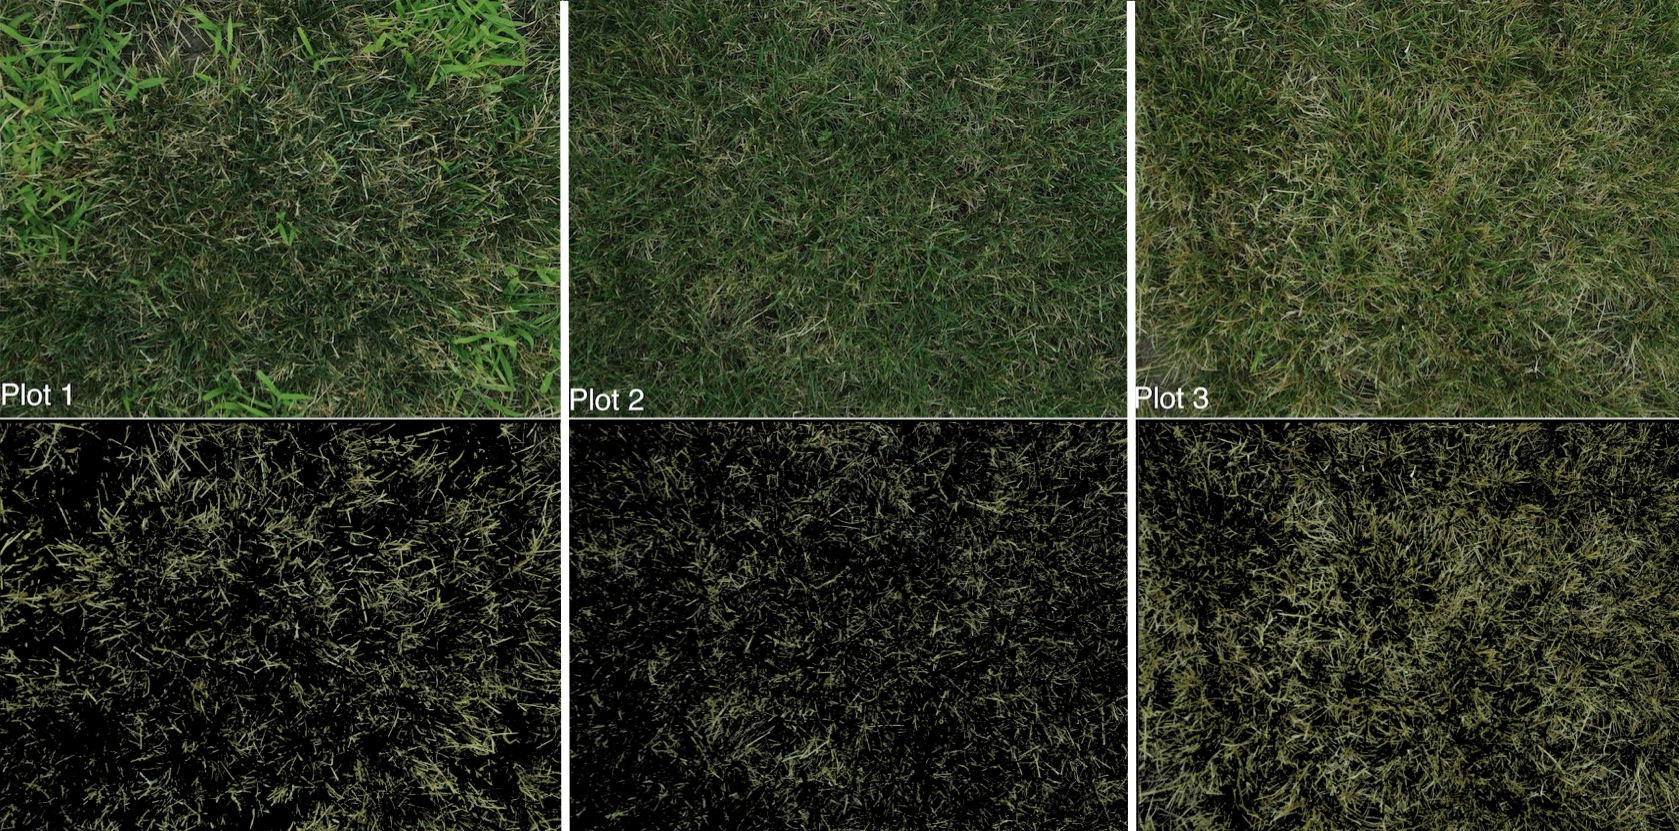 original images of the three perennial ryegrass plots compared with the images with stem tissue